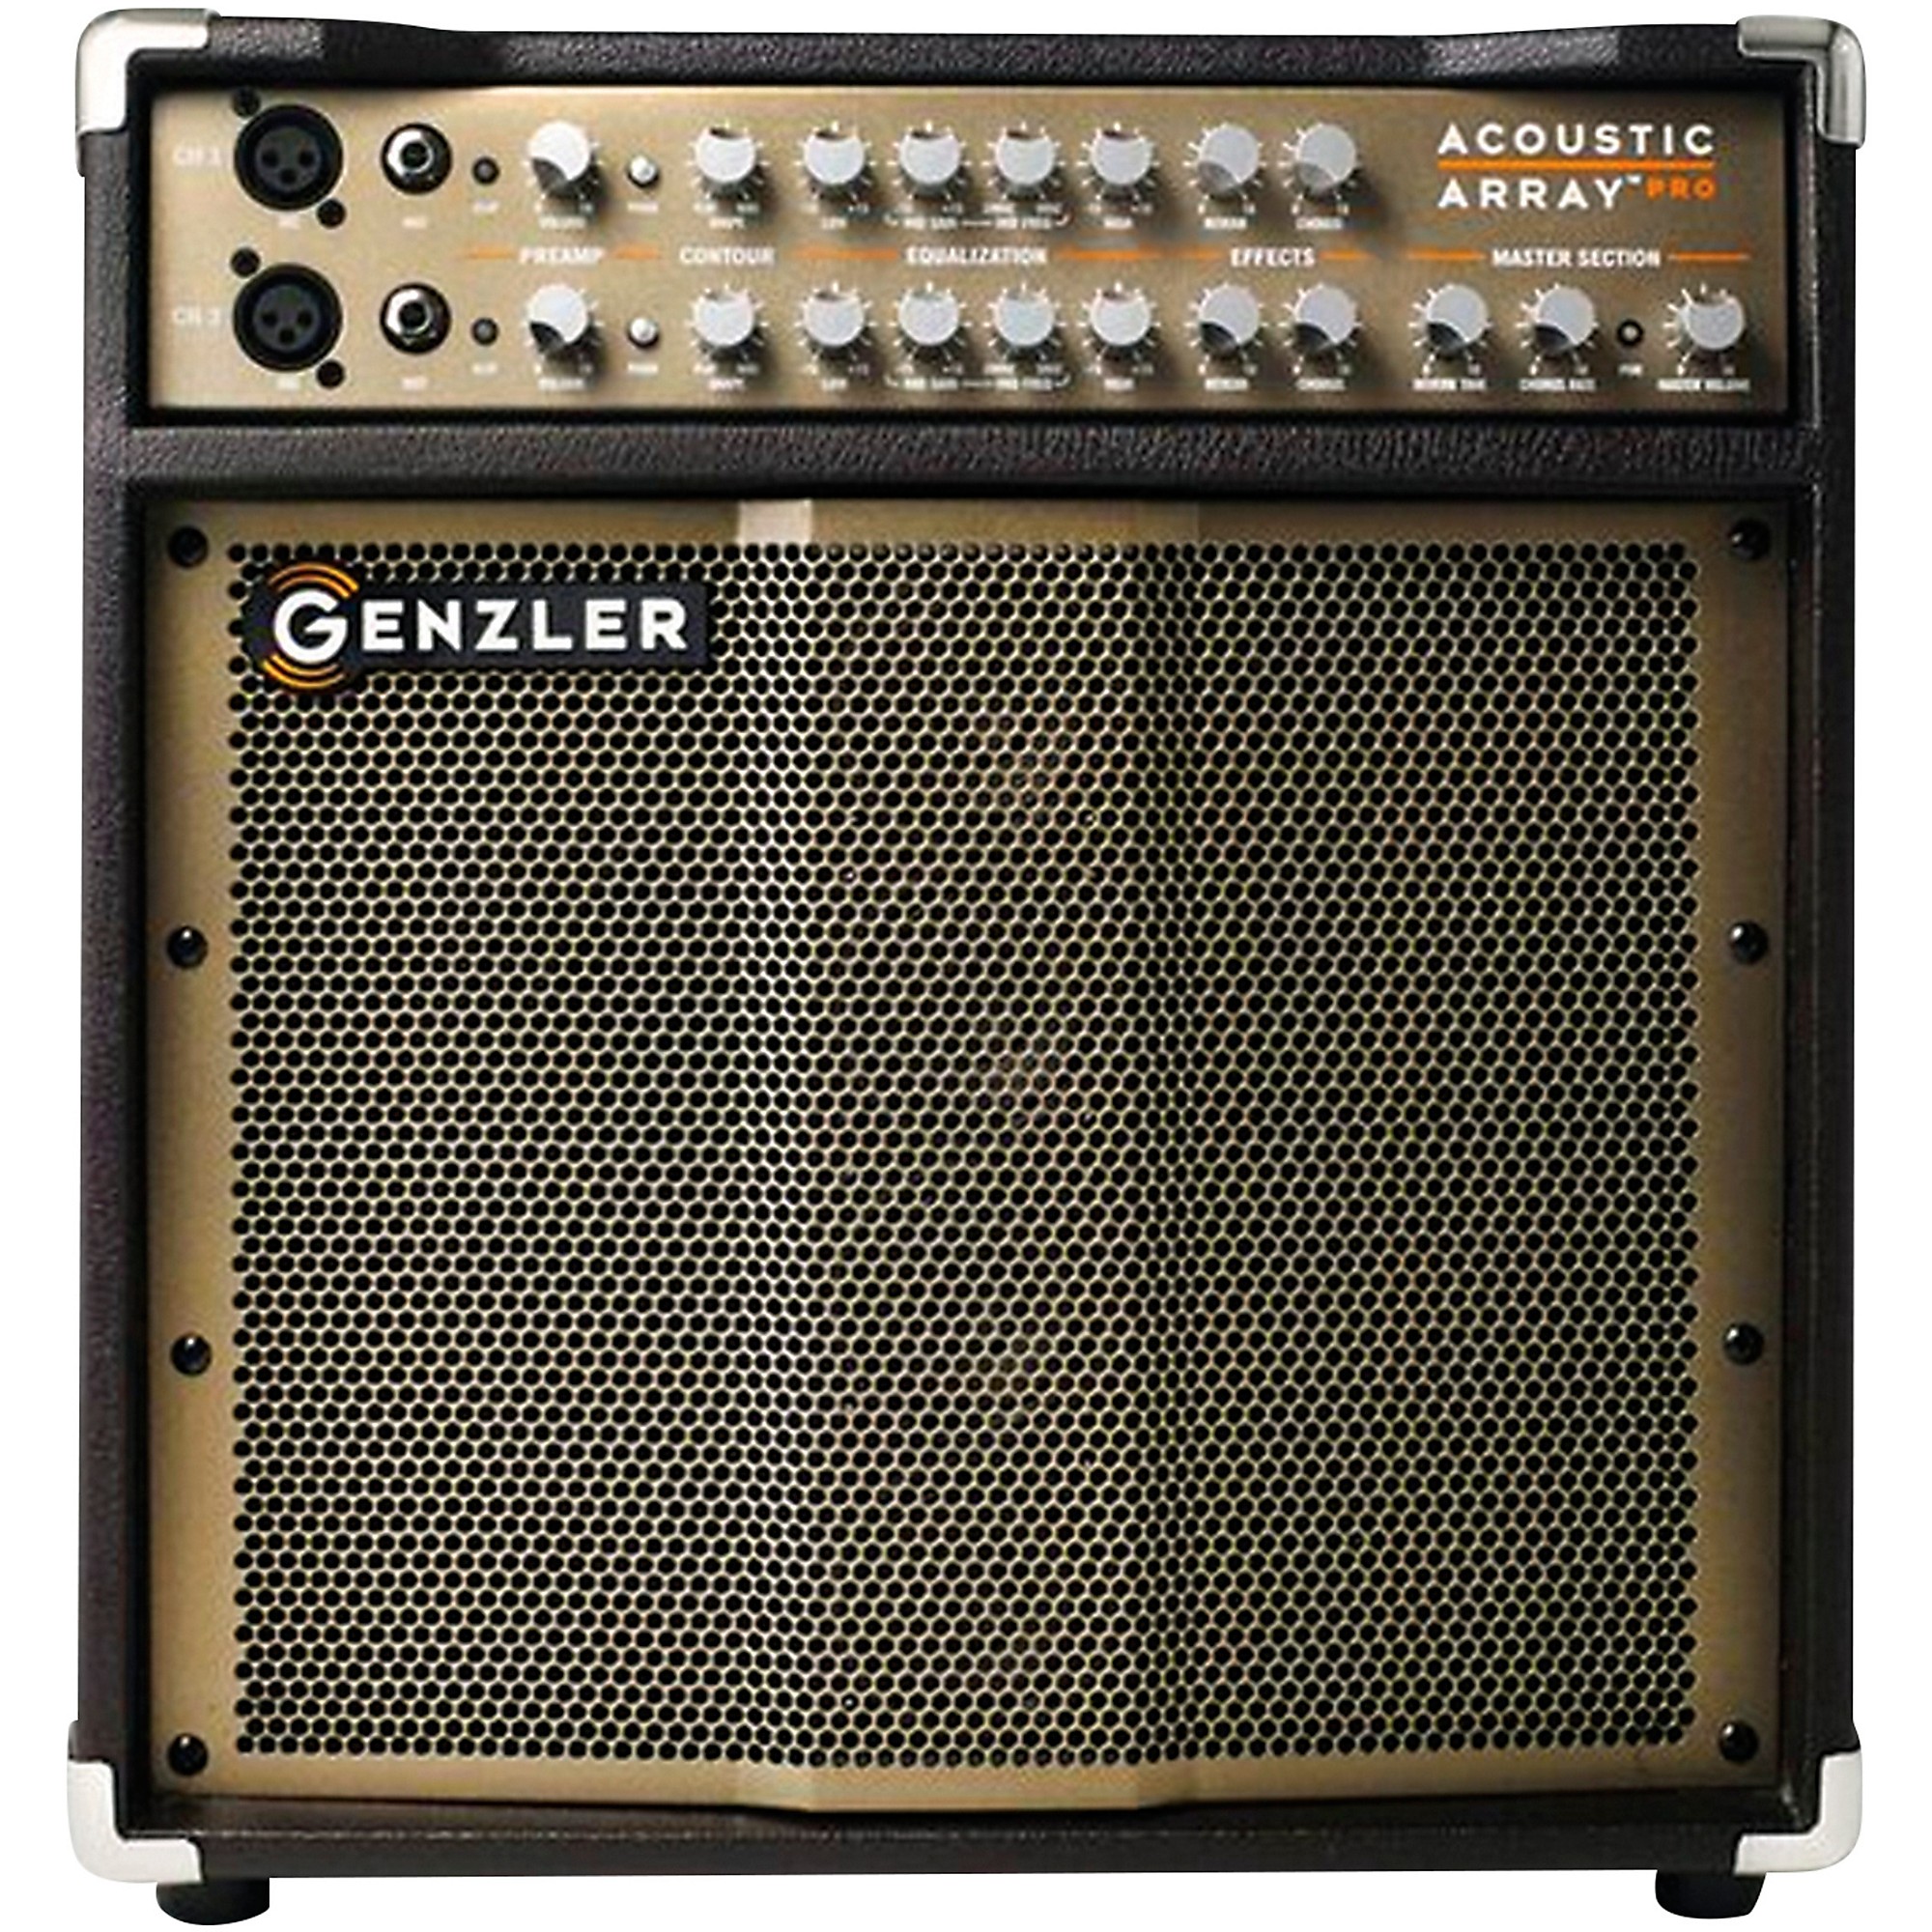 Genzler Amplification Acoustic Array PRO 300W 1x10 with 4x3 Line Array  Acoustic Guitar Combo Amp Brown Guitar Center